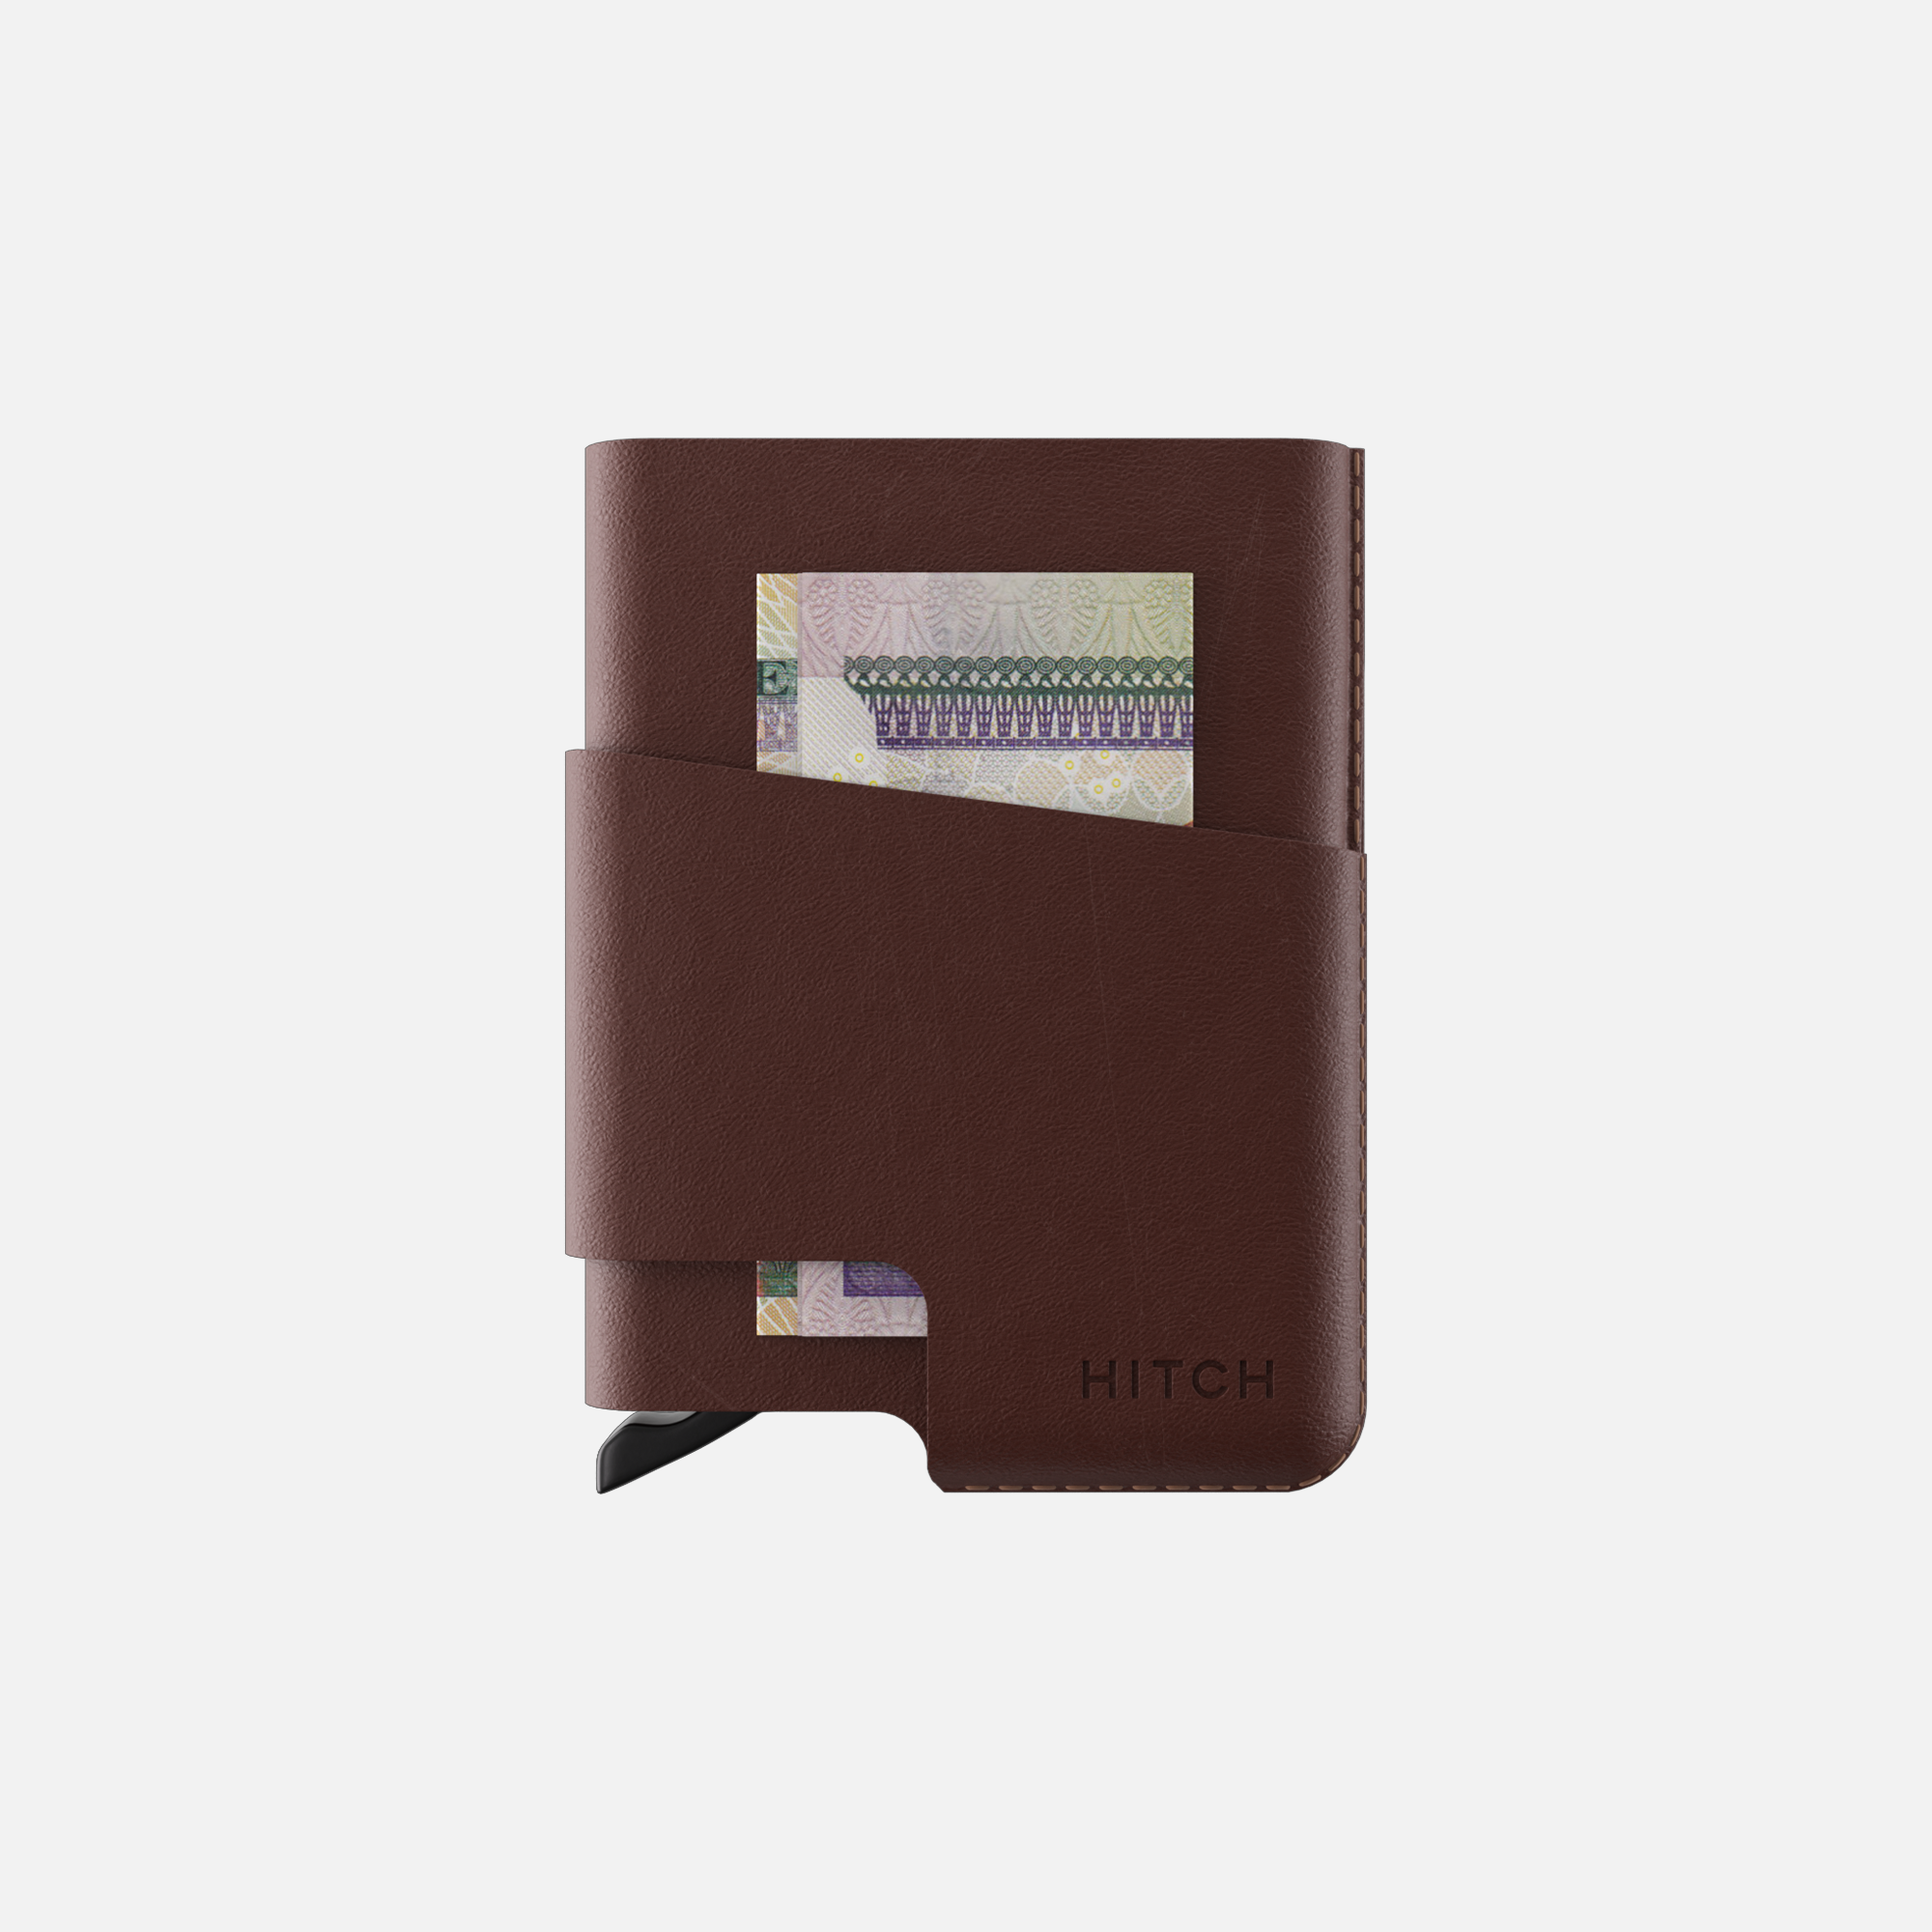 Brown wallet with Egyptian currency note in money clip.